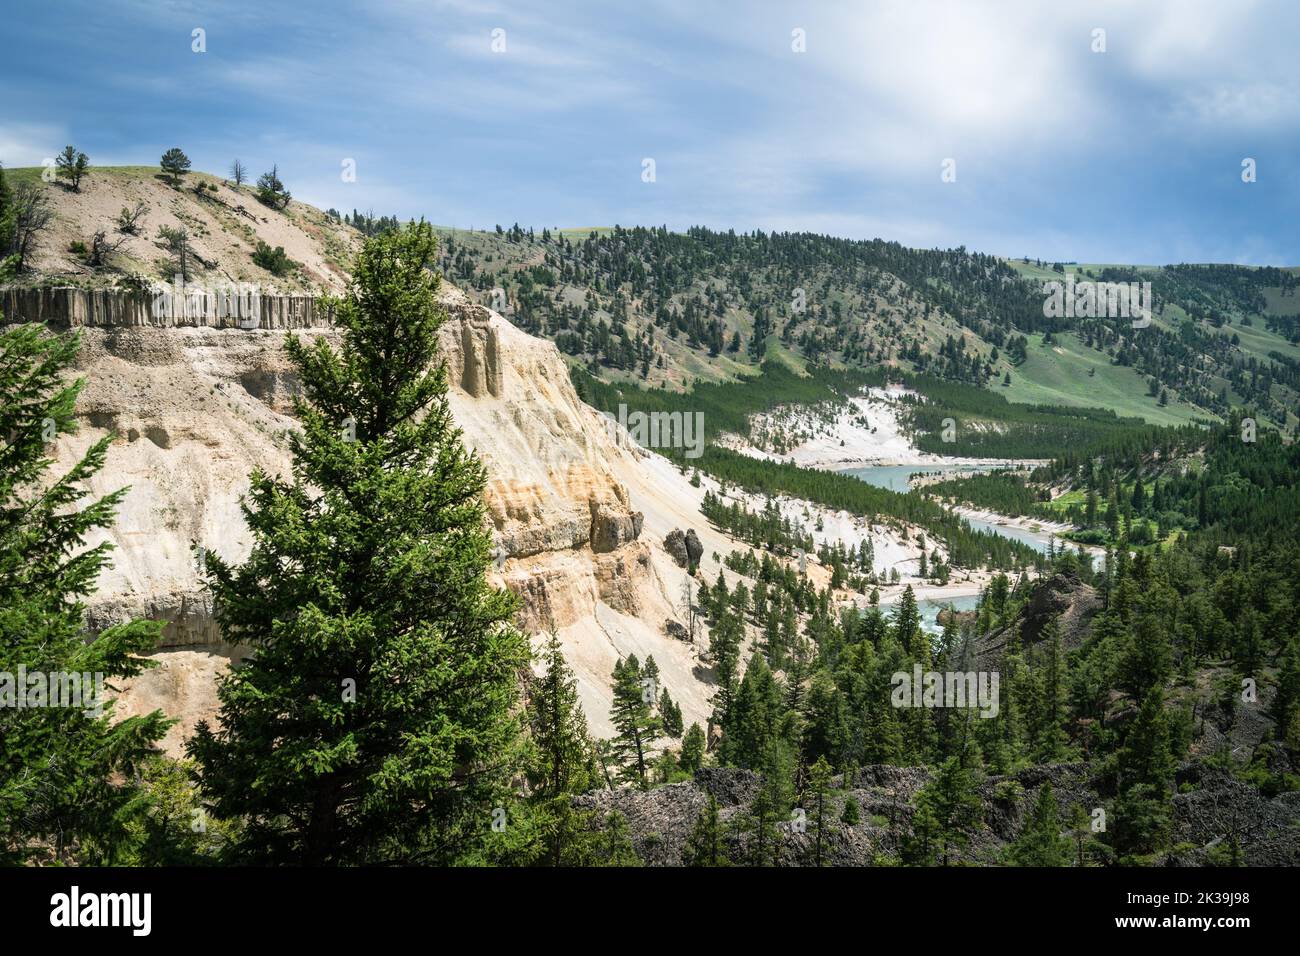 Interesting scenery near the Calcite Springs overlook, of the basalt columns and rock formations along the Yellowstone River in Yellowstone National P Stock Photo